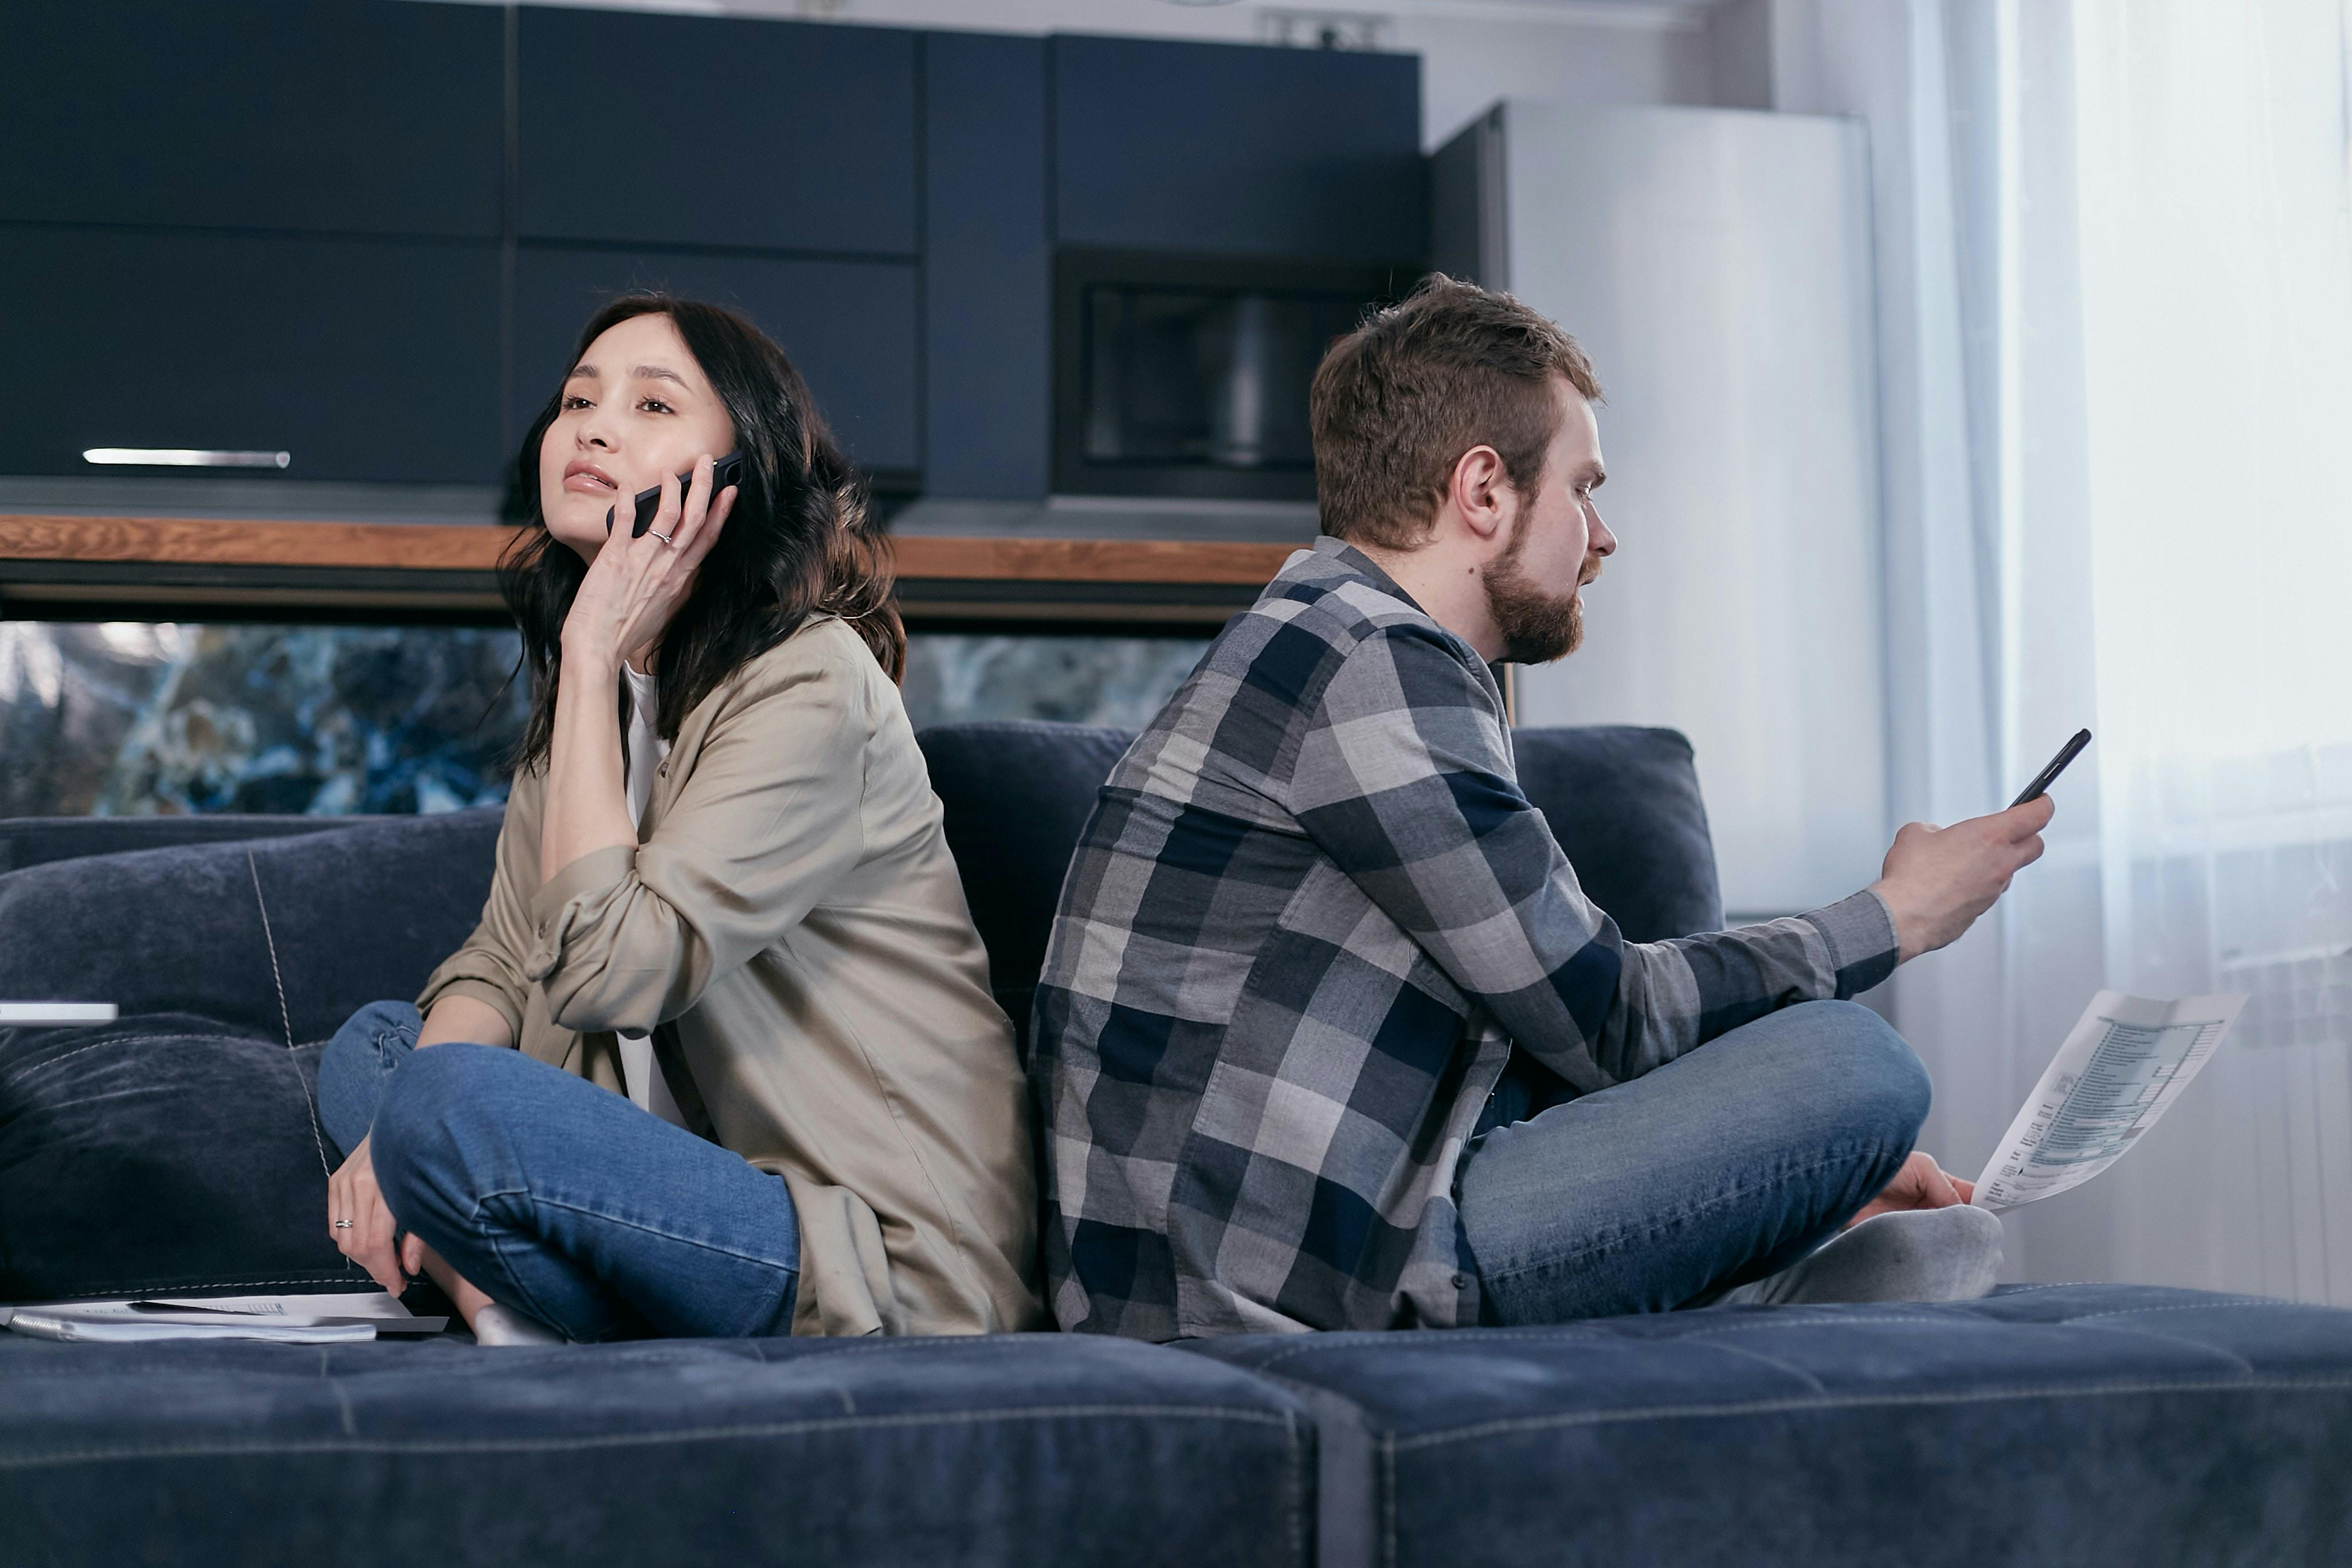 Man and woman seated on couch using mobile phones